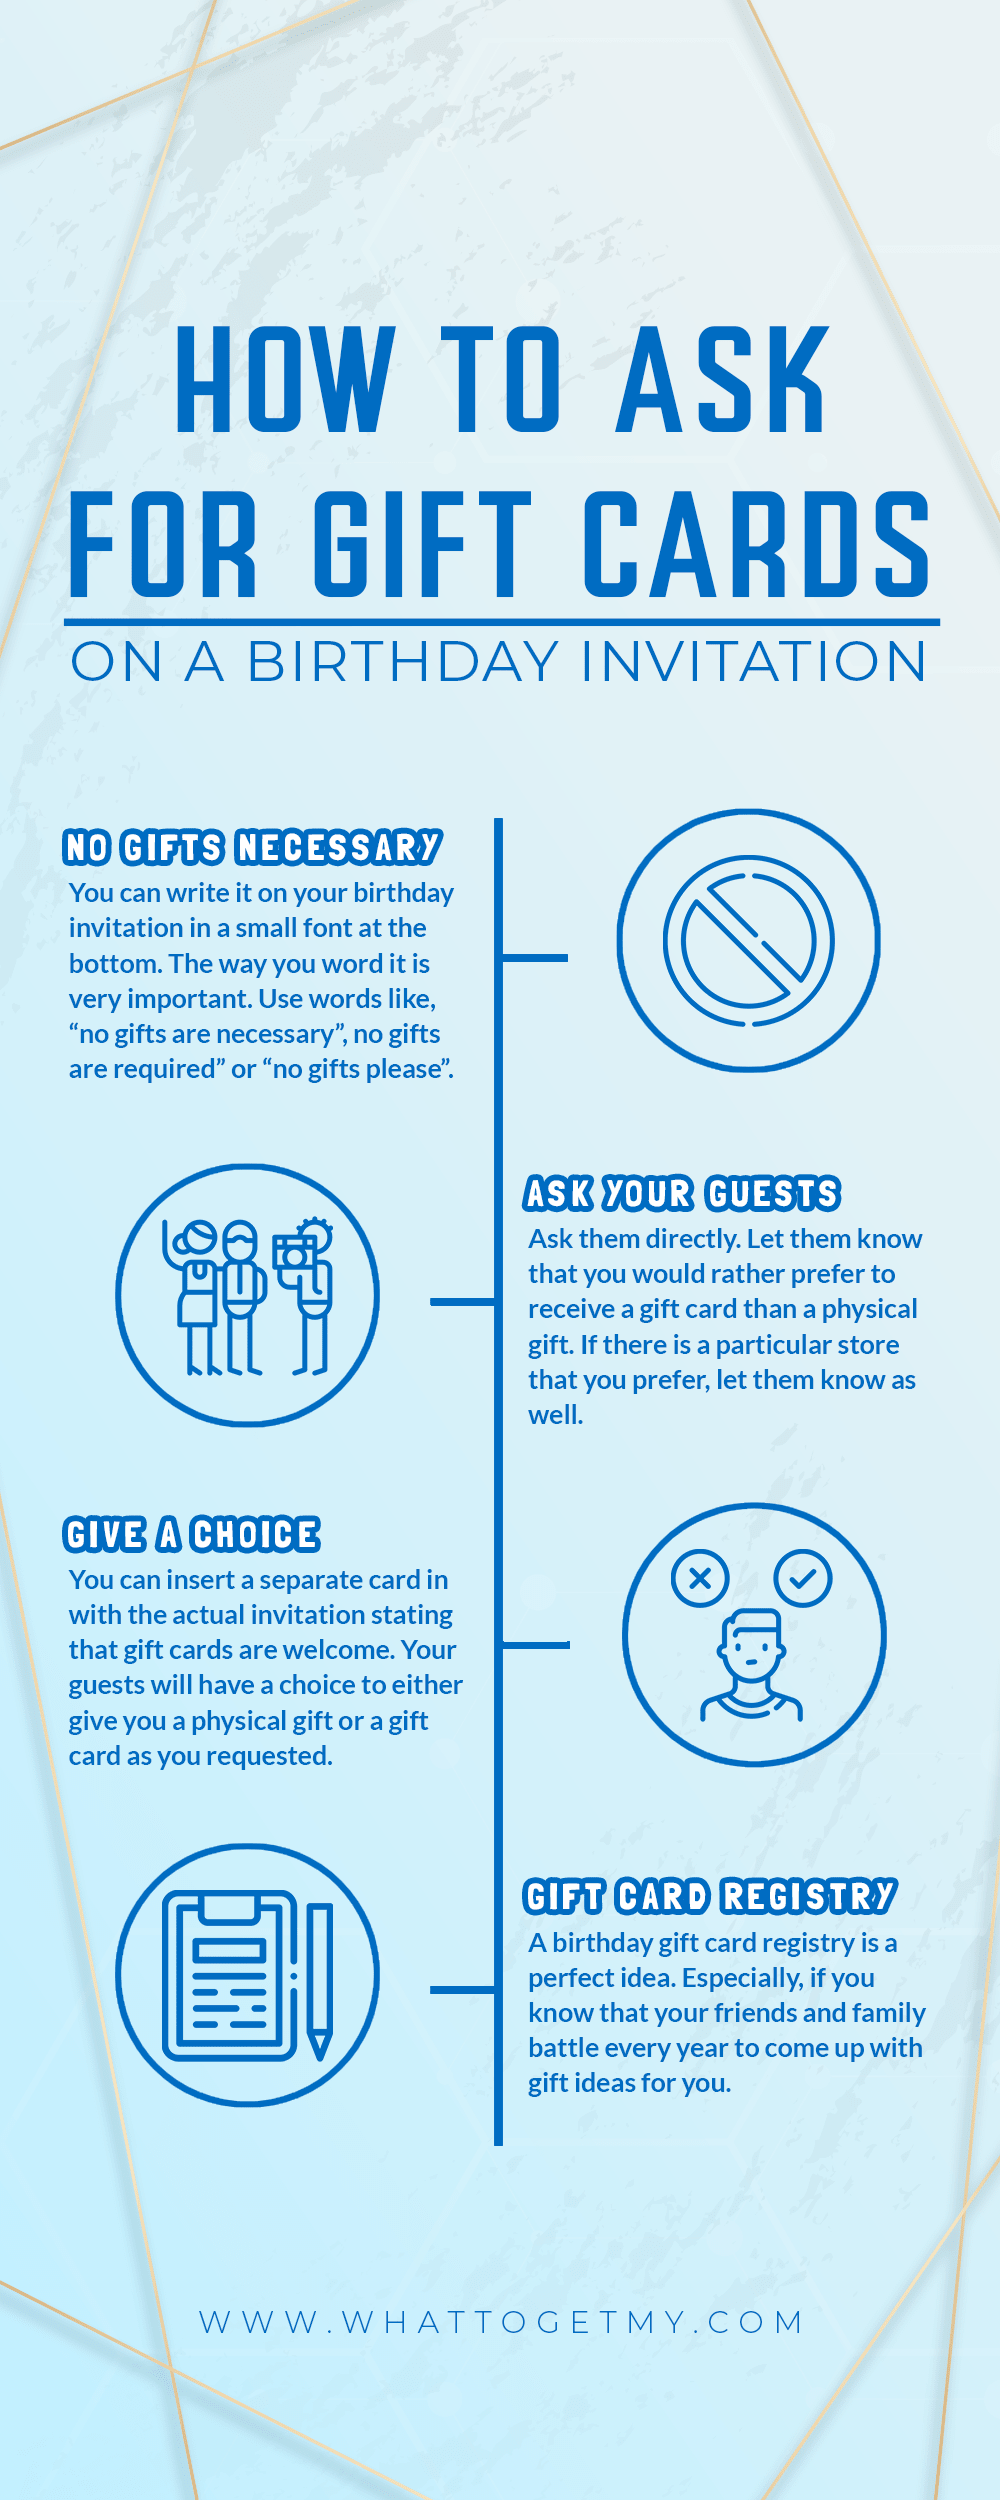 Infographic How to Ask for Gift Cards on a Birthday Invitation-min